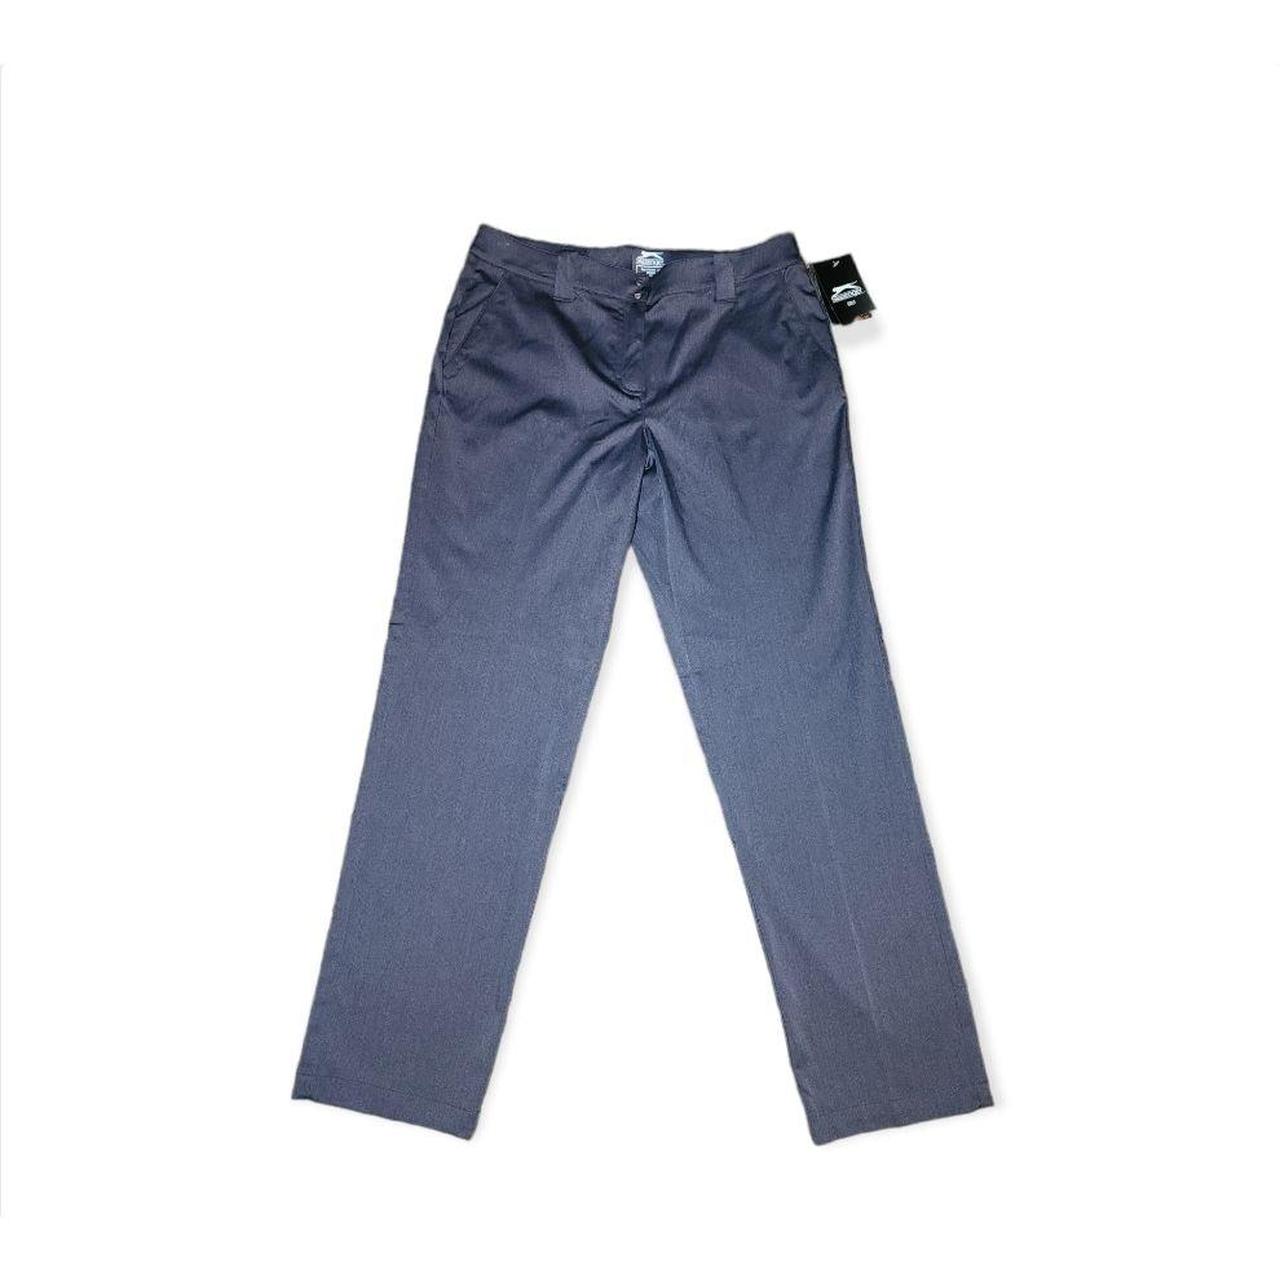 Product Image 1 - Womens golf pants
Size brand new